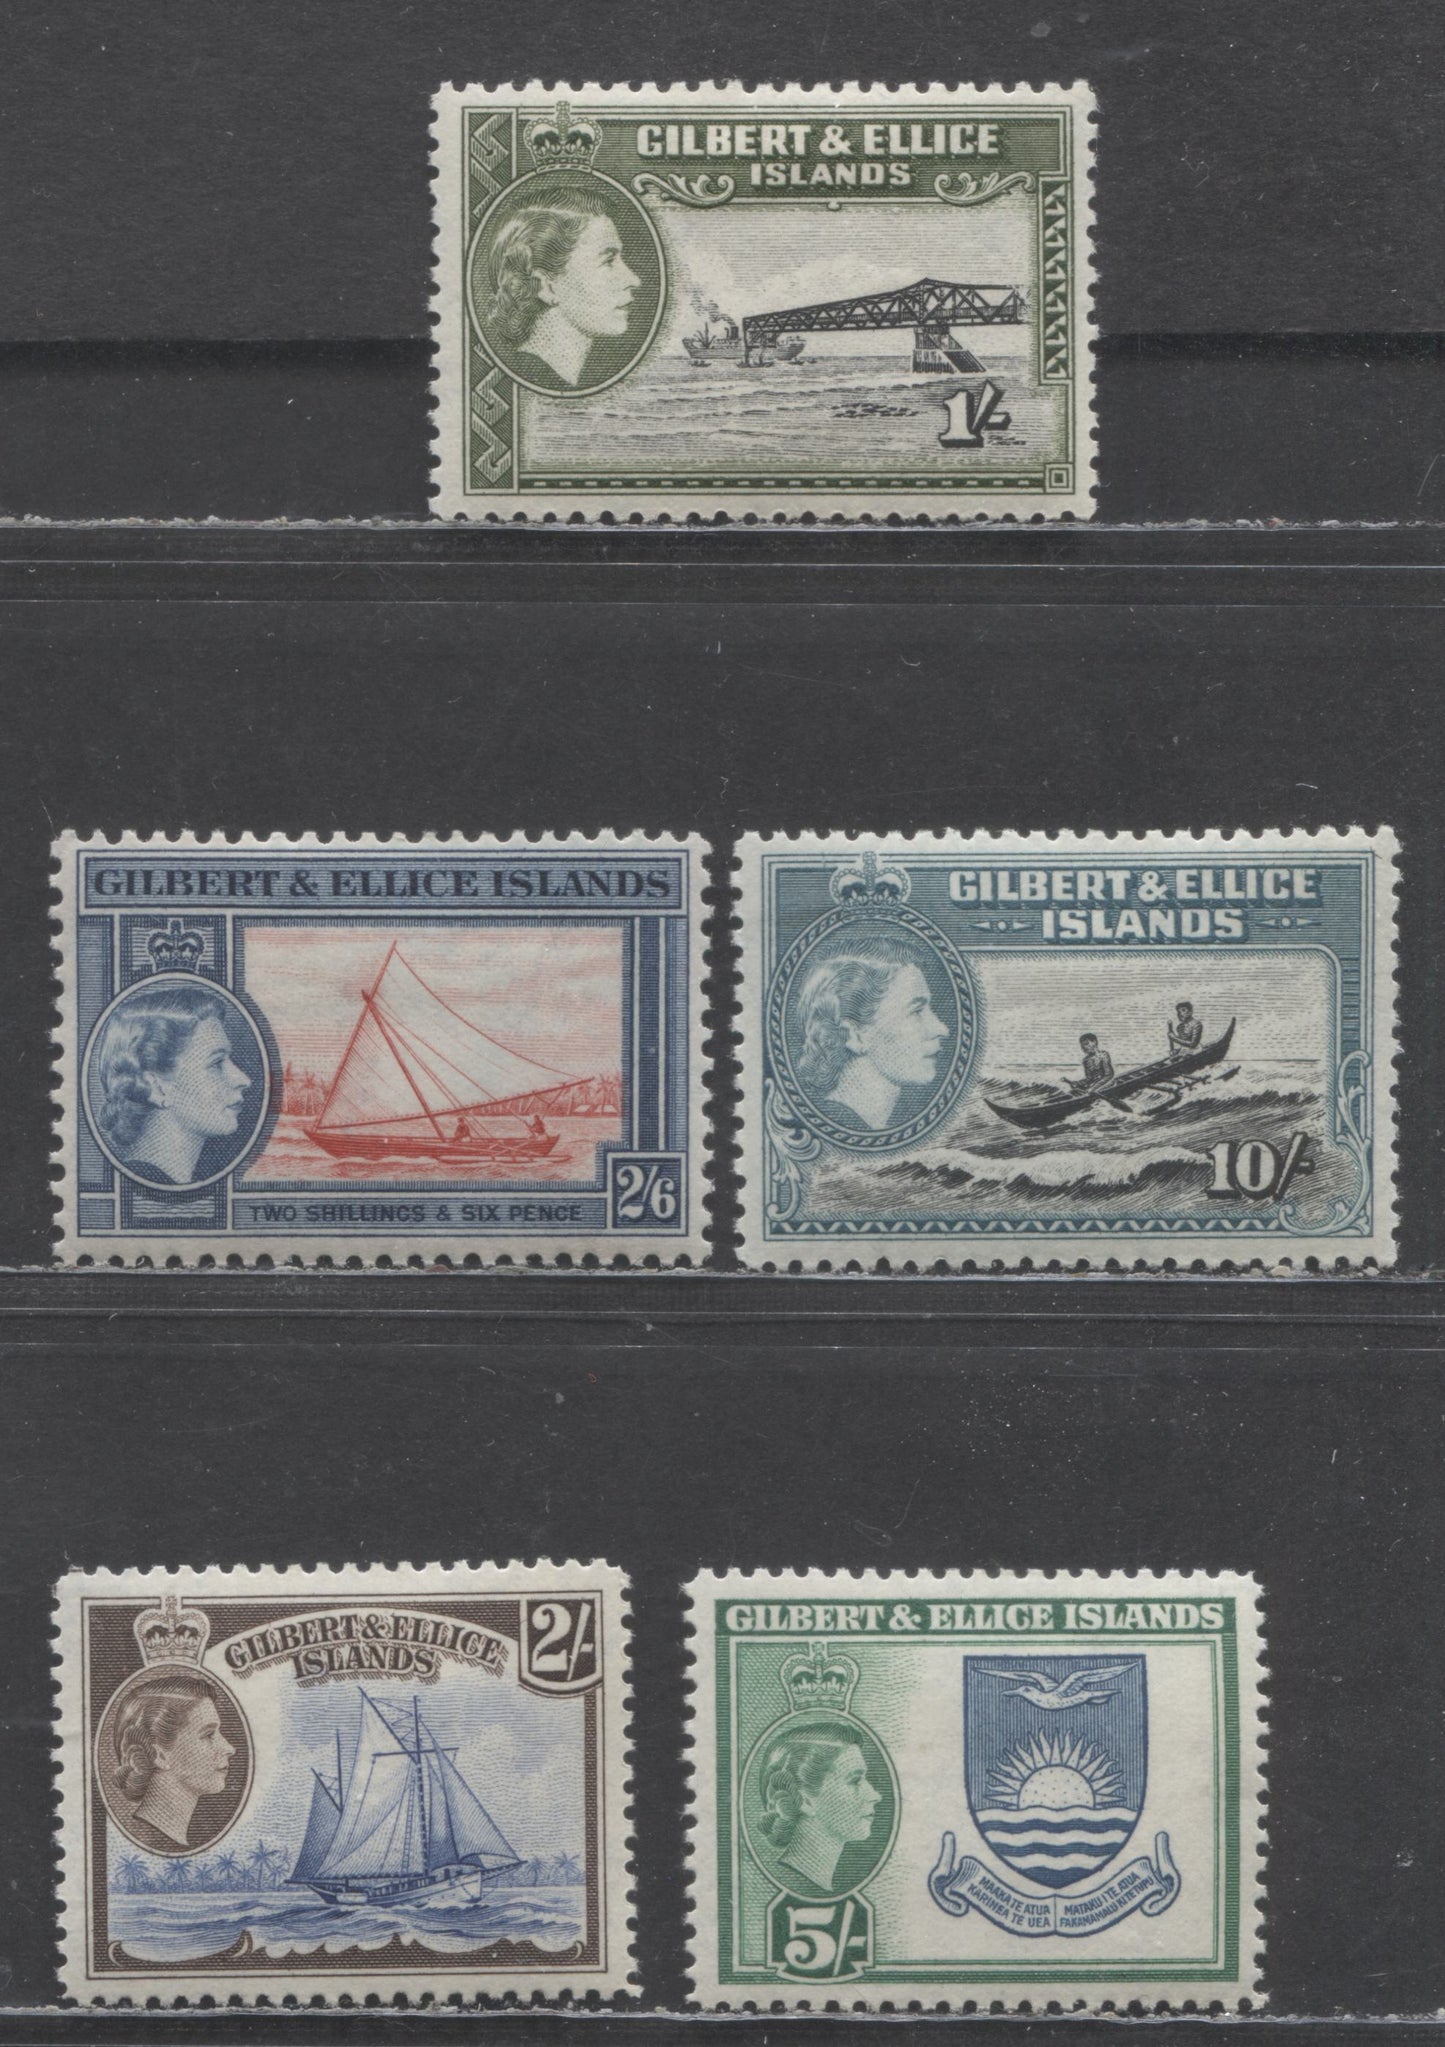 Lot 2 Gilbert & Ellice Islands SC#68-72 1956-1965 Pictorial Definitives, 5 VFOG Singles, Click on Listing to See ALL Pictures, Estimated Value $25